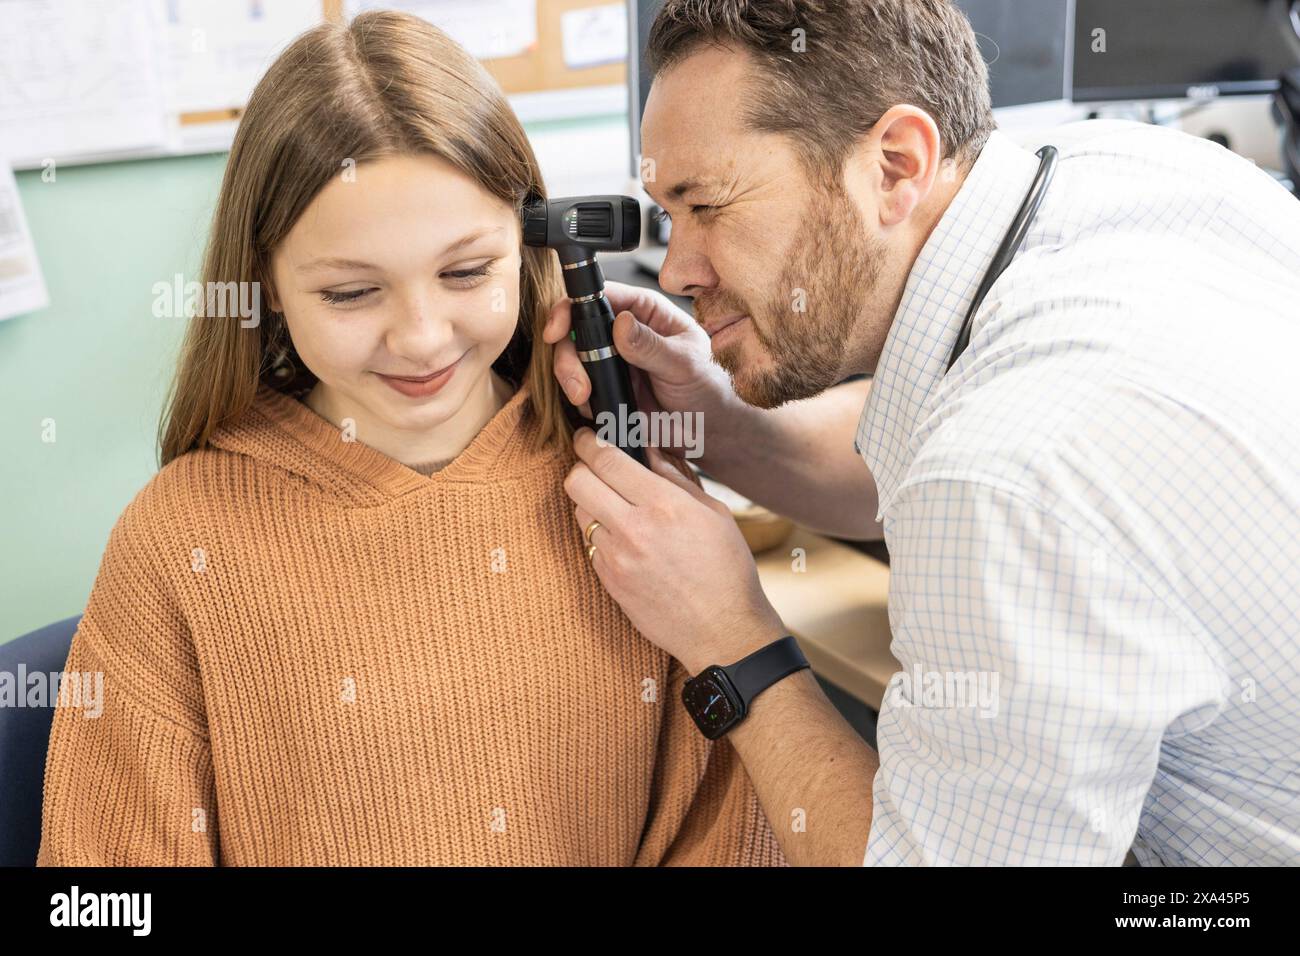 Doctor examining a young girl's ear with an otoscope Stock Photo